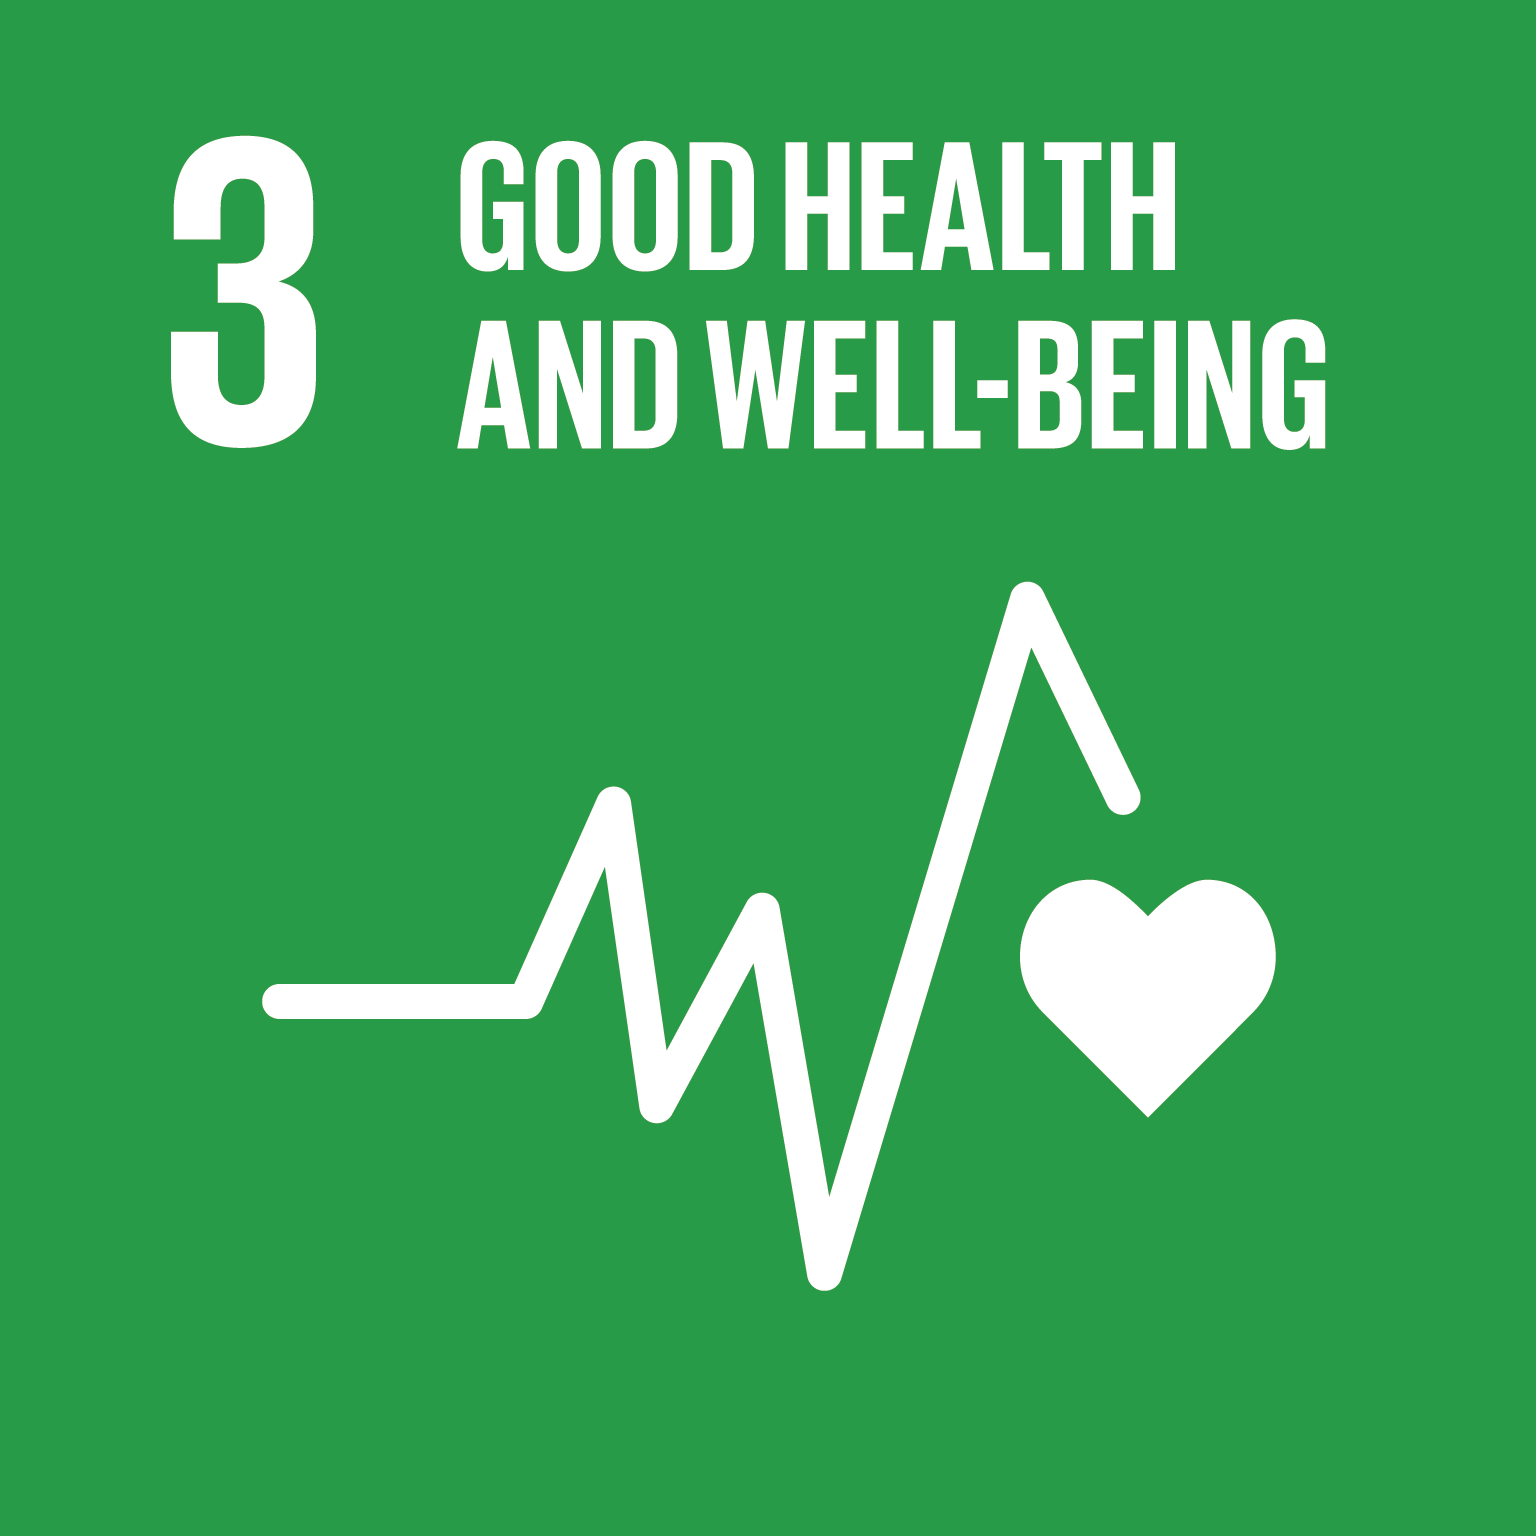 Goal 3 - good health and well-being